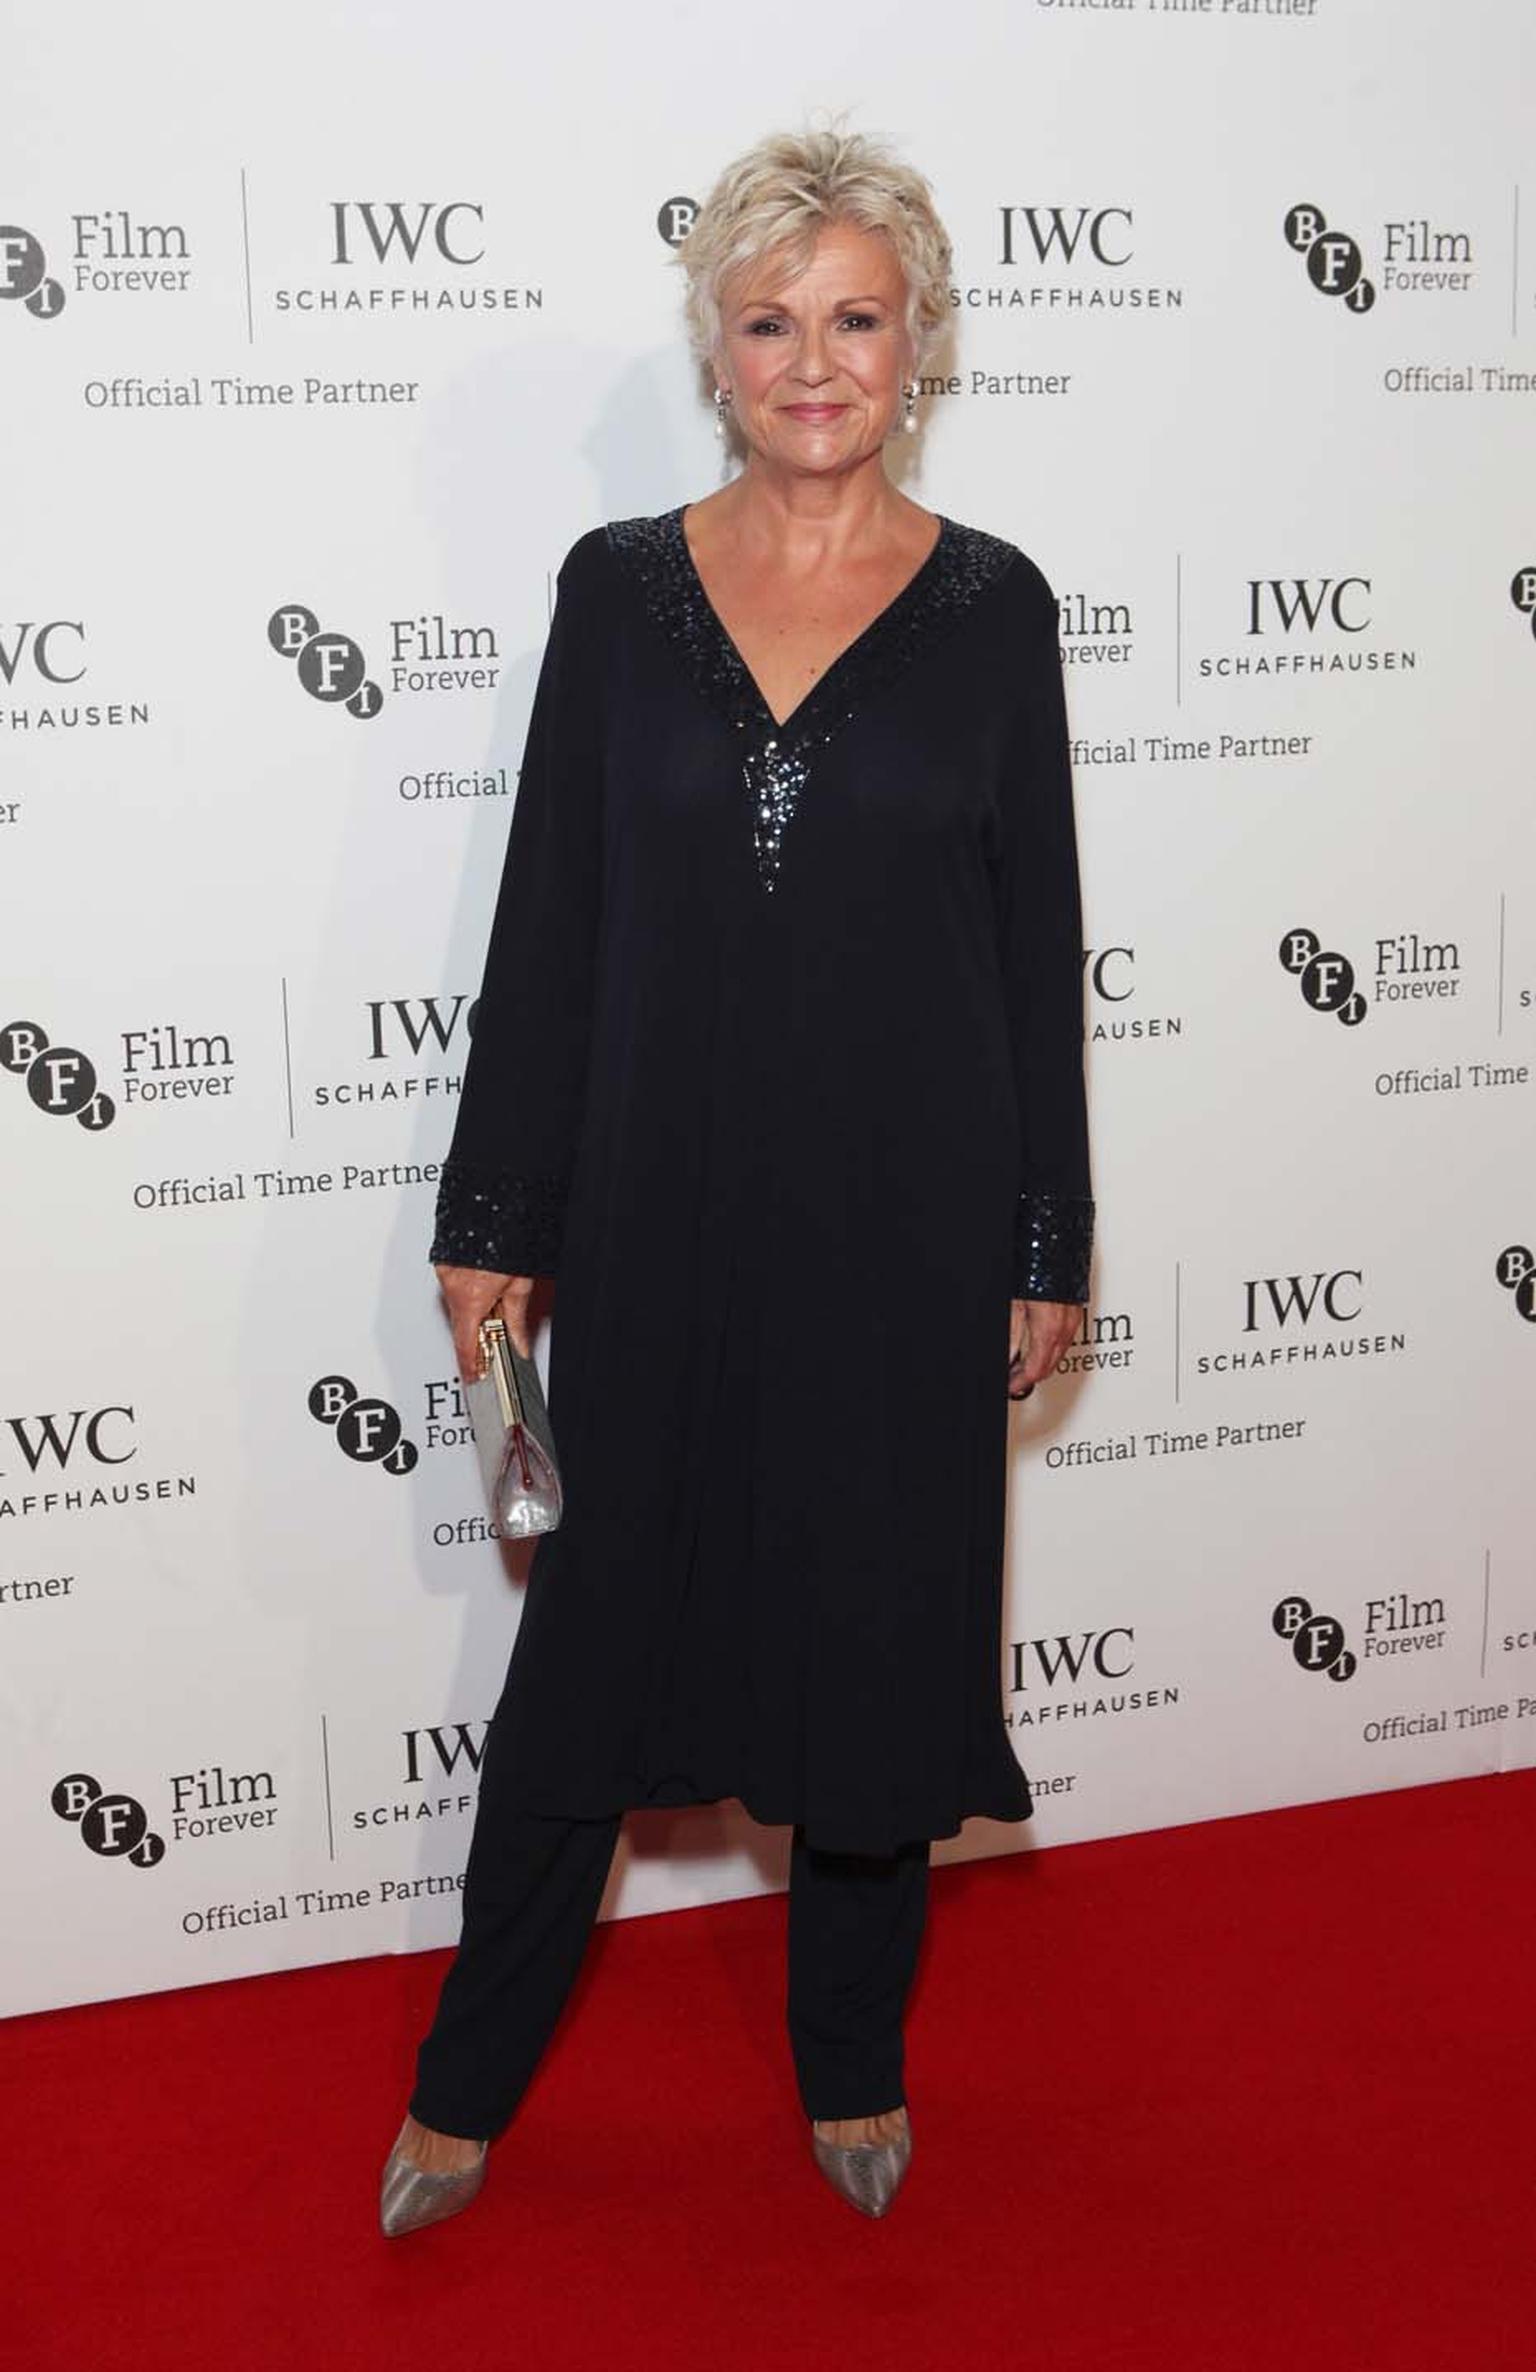 During the BFI London Film Festival IWC Gala Dinner Julie Walters was presented with an IWC Portofino watch. "It's absolute heaven,” she said, remarking how delighted she was to be given a watch since the only use for a BAFTA award is propping a door open